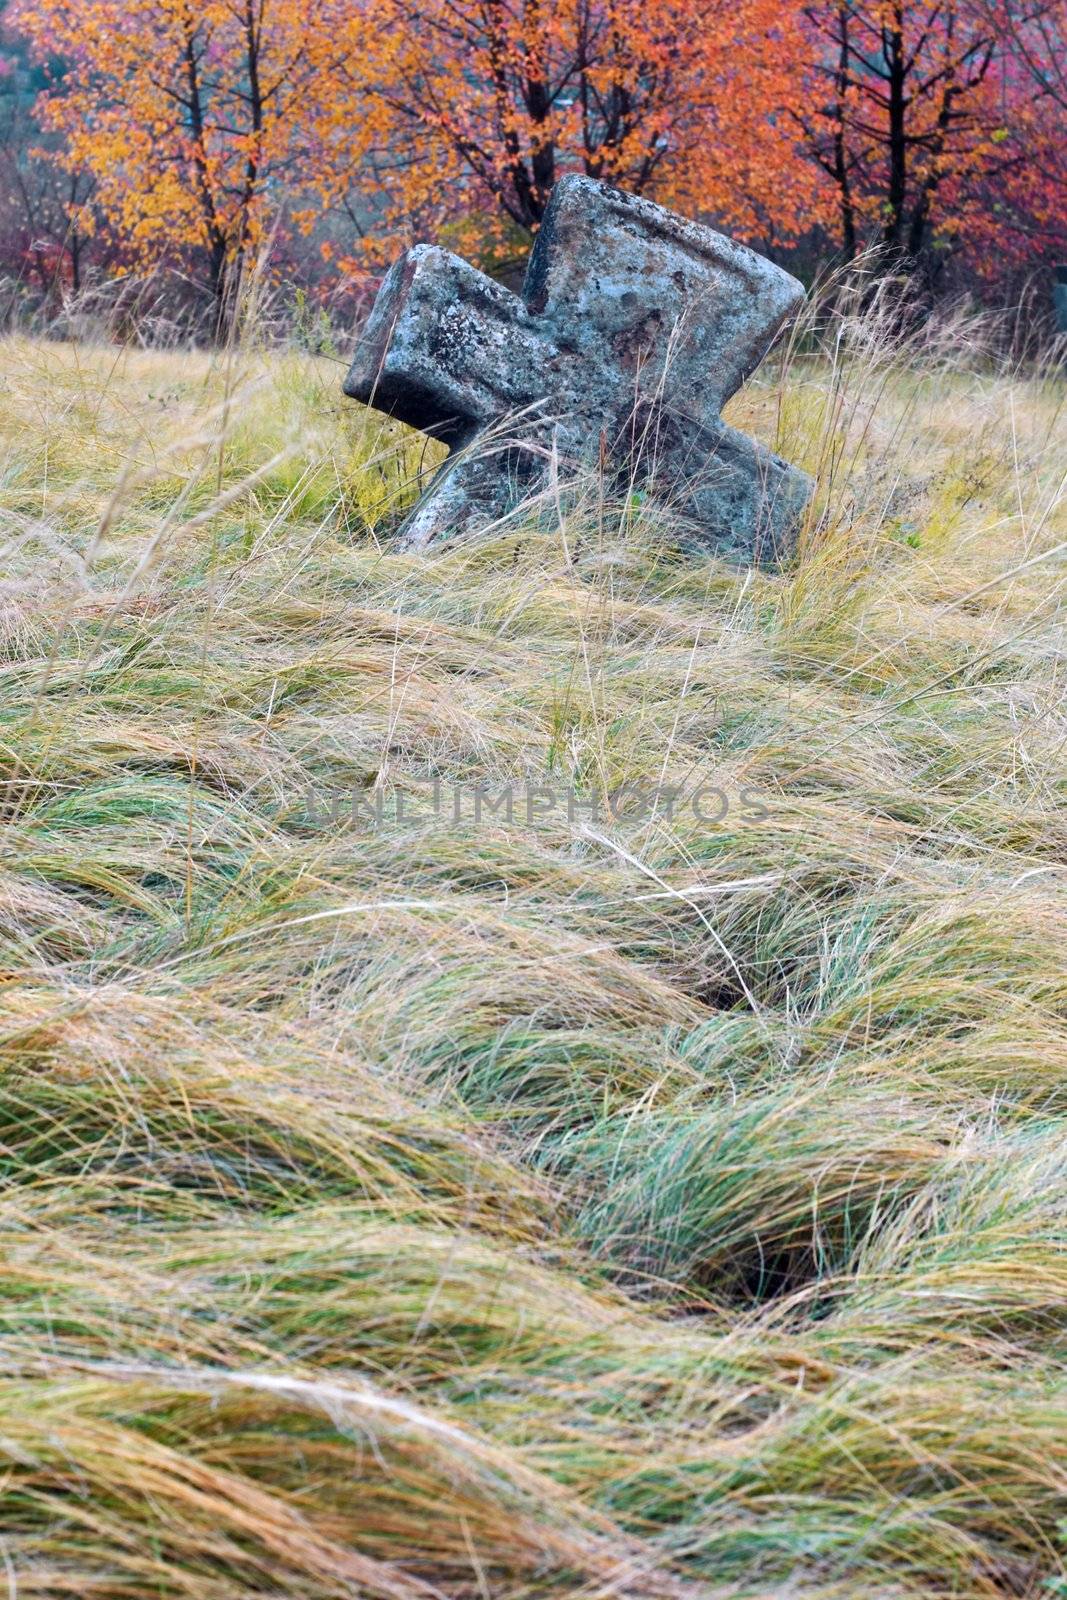 An image of old cross in grass